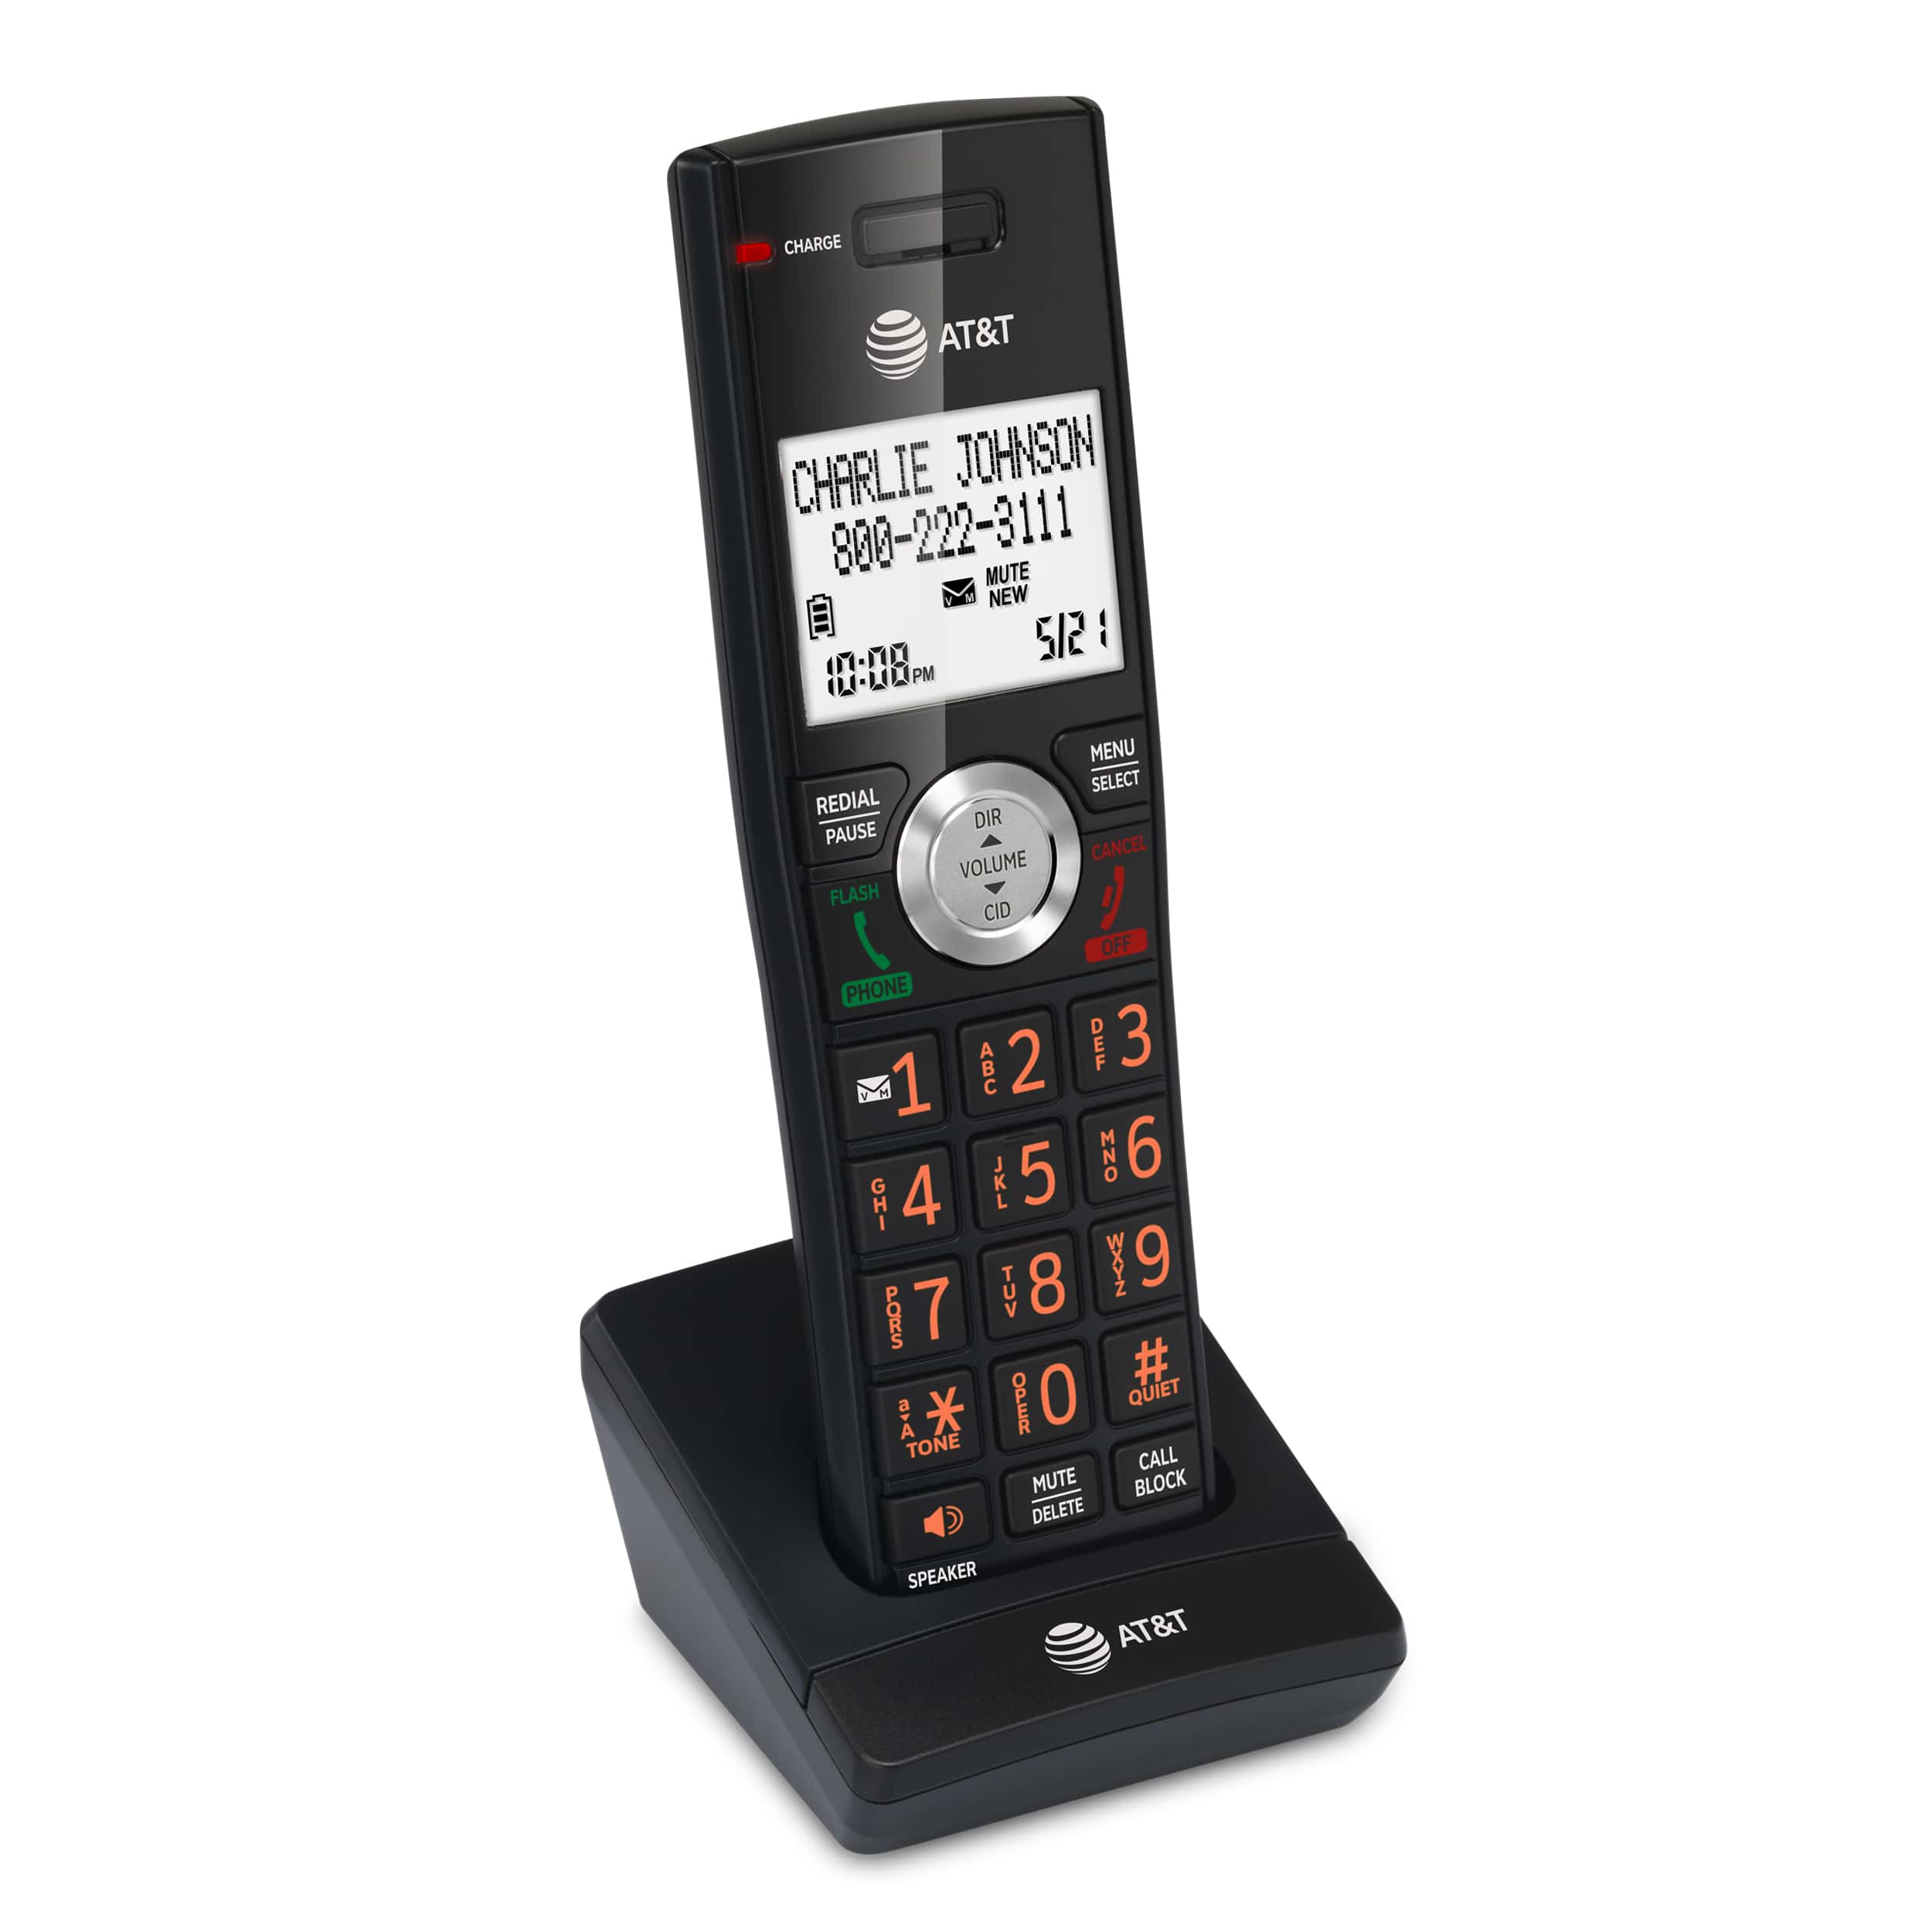 Cordless Accessory Handset for AT&T CL82207, CL82267, CL82307, CL82367, CL82407, CL83207, CL83407, CL84107, and CL84207 - view 3